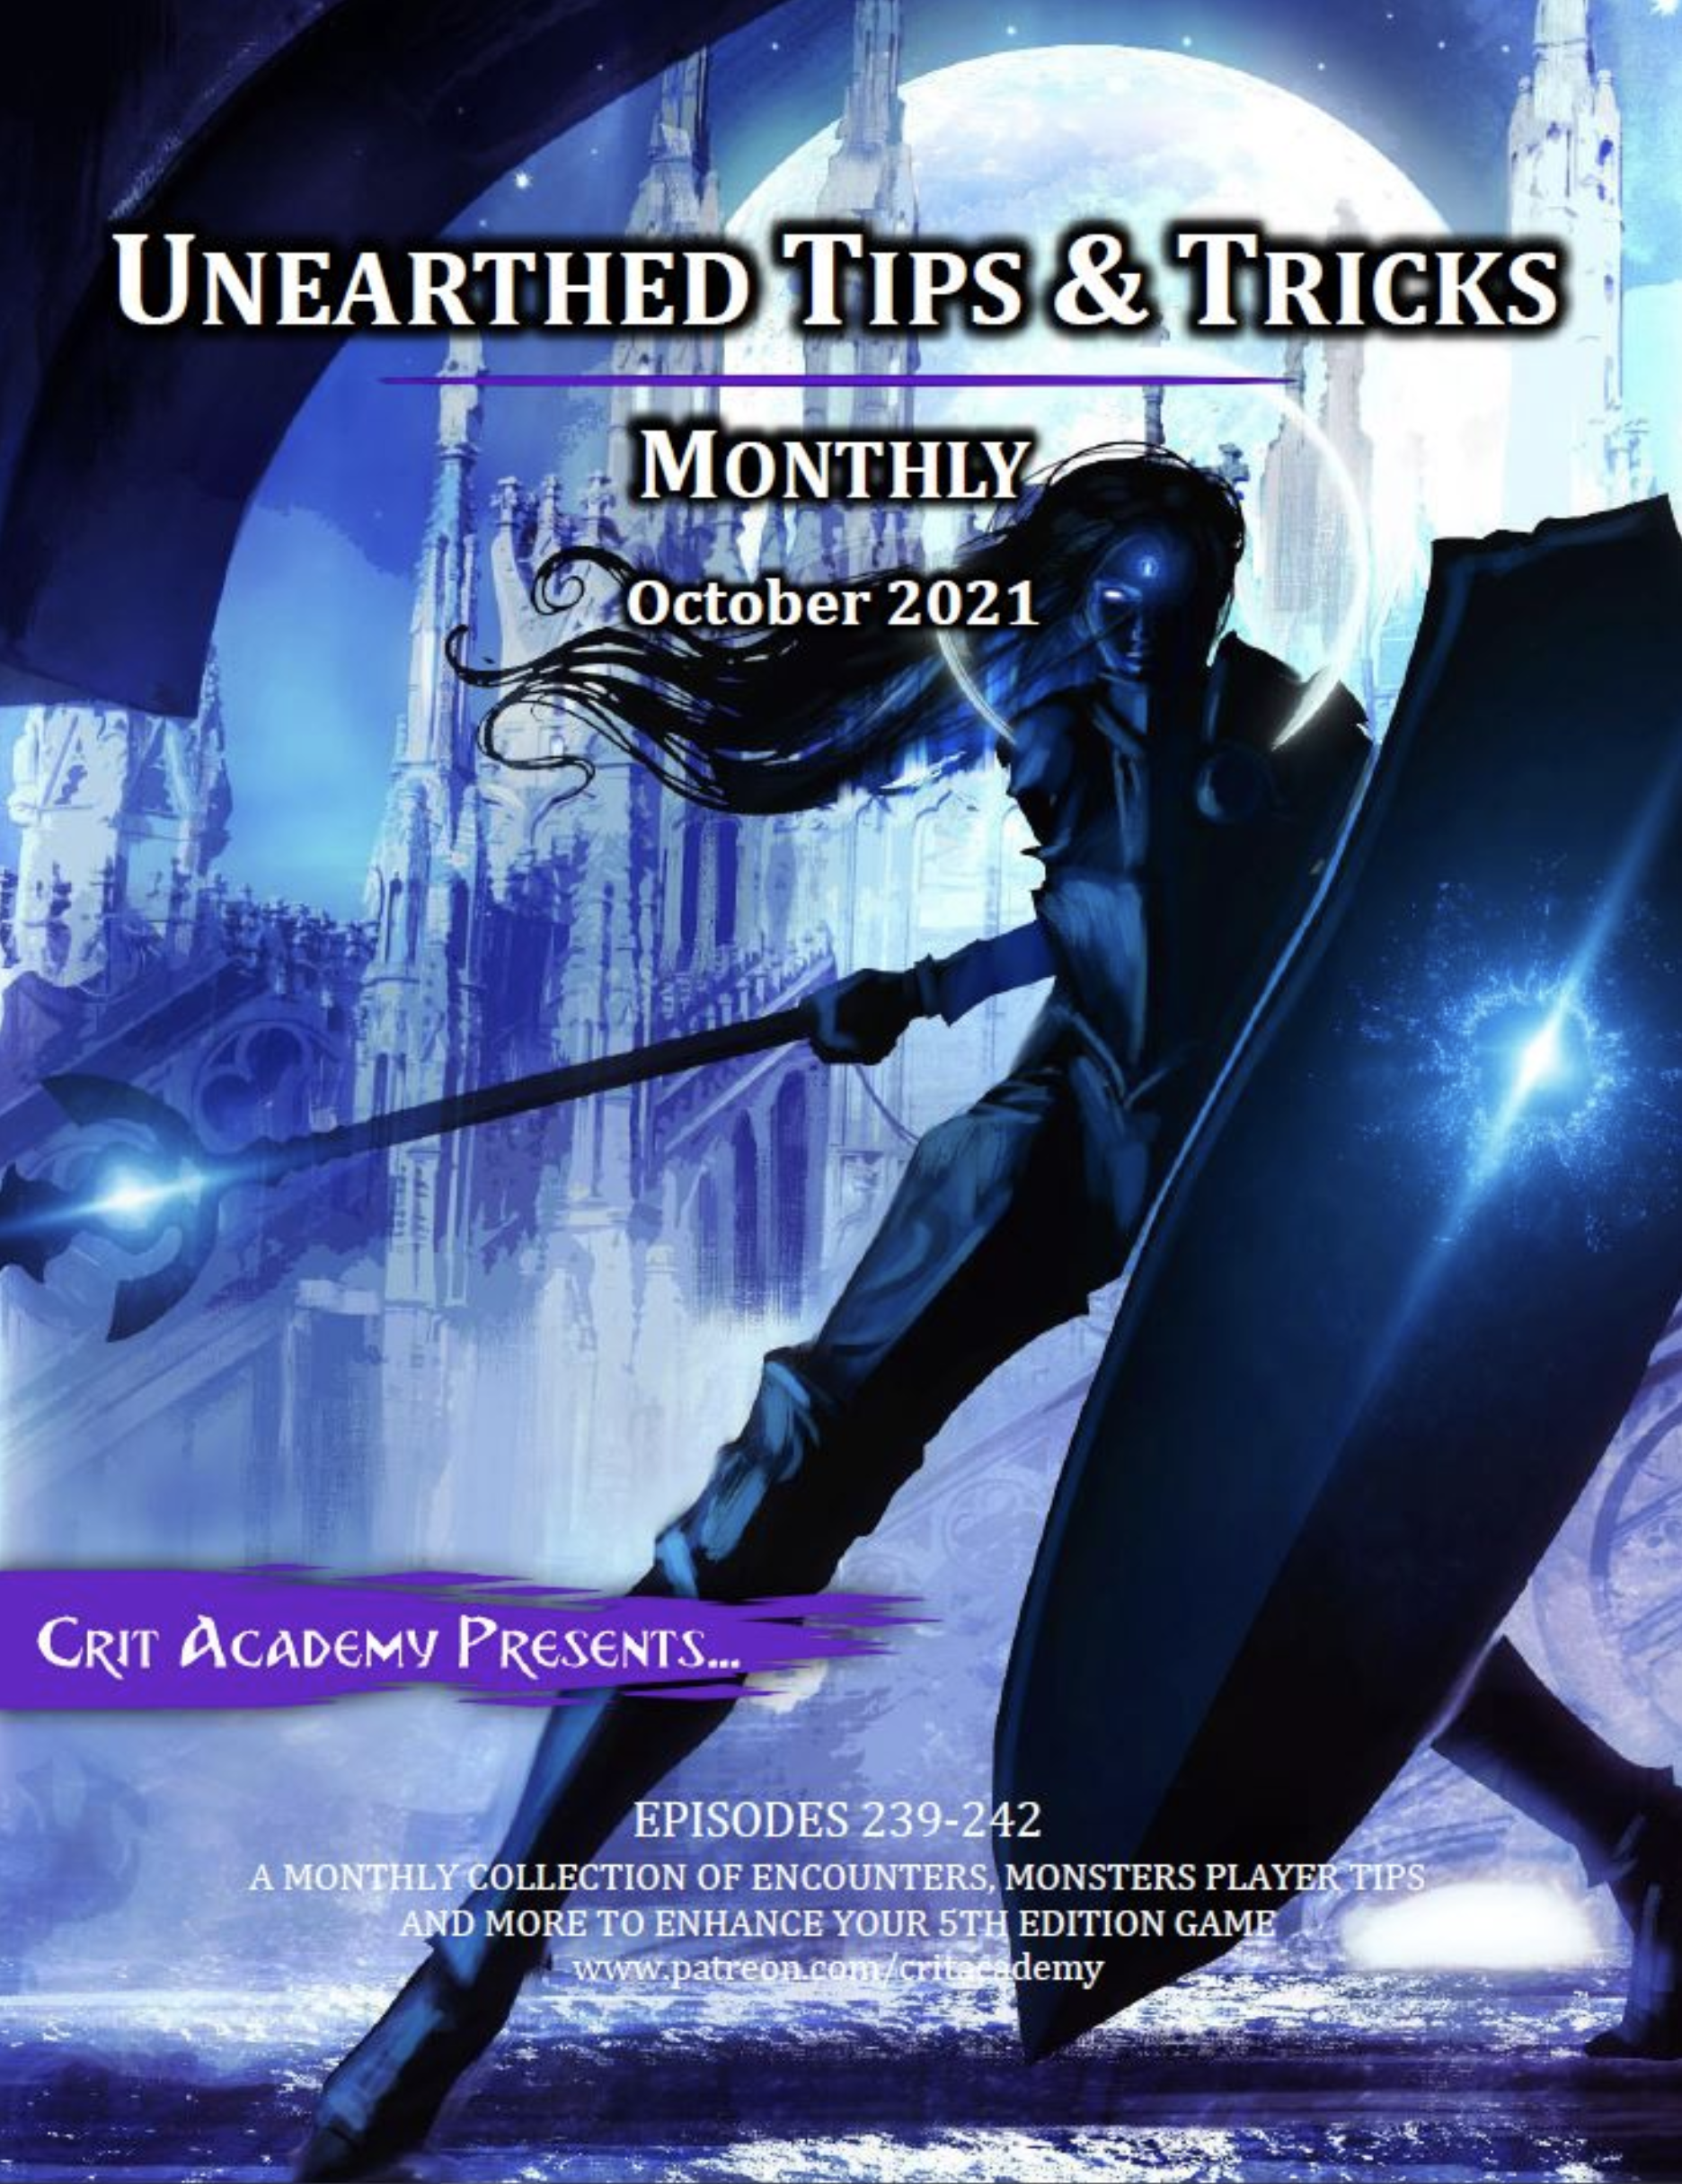 unearthed tips and tricks | crit academy